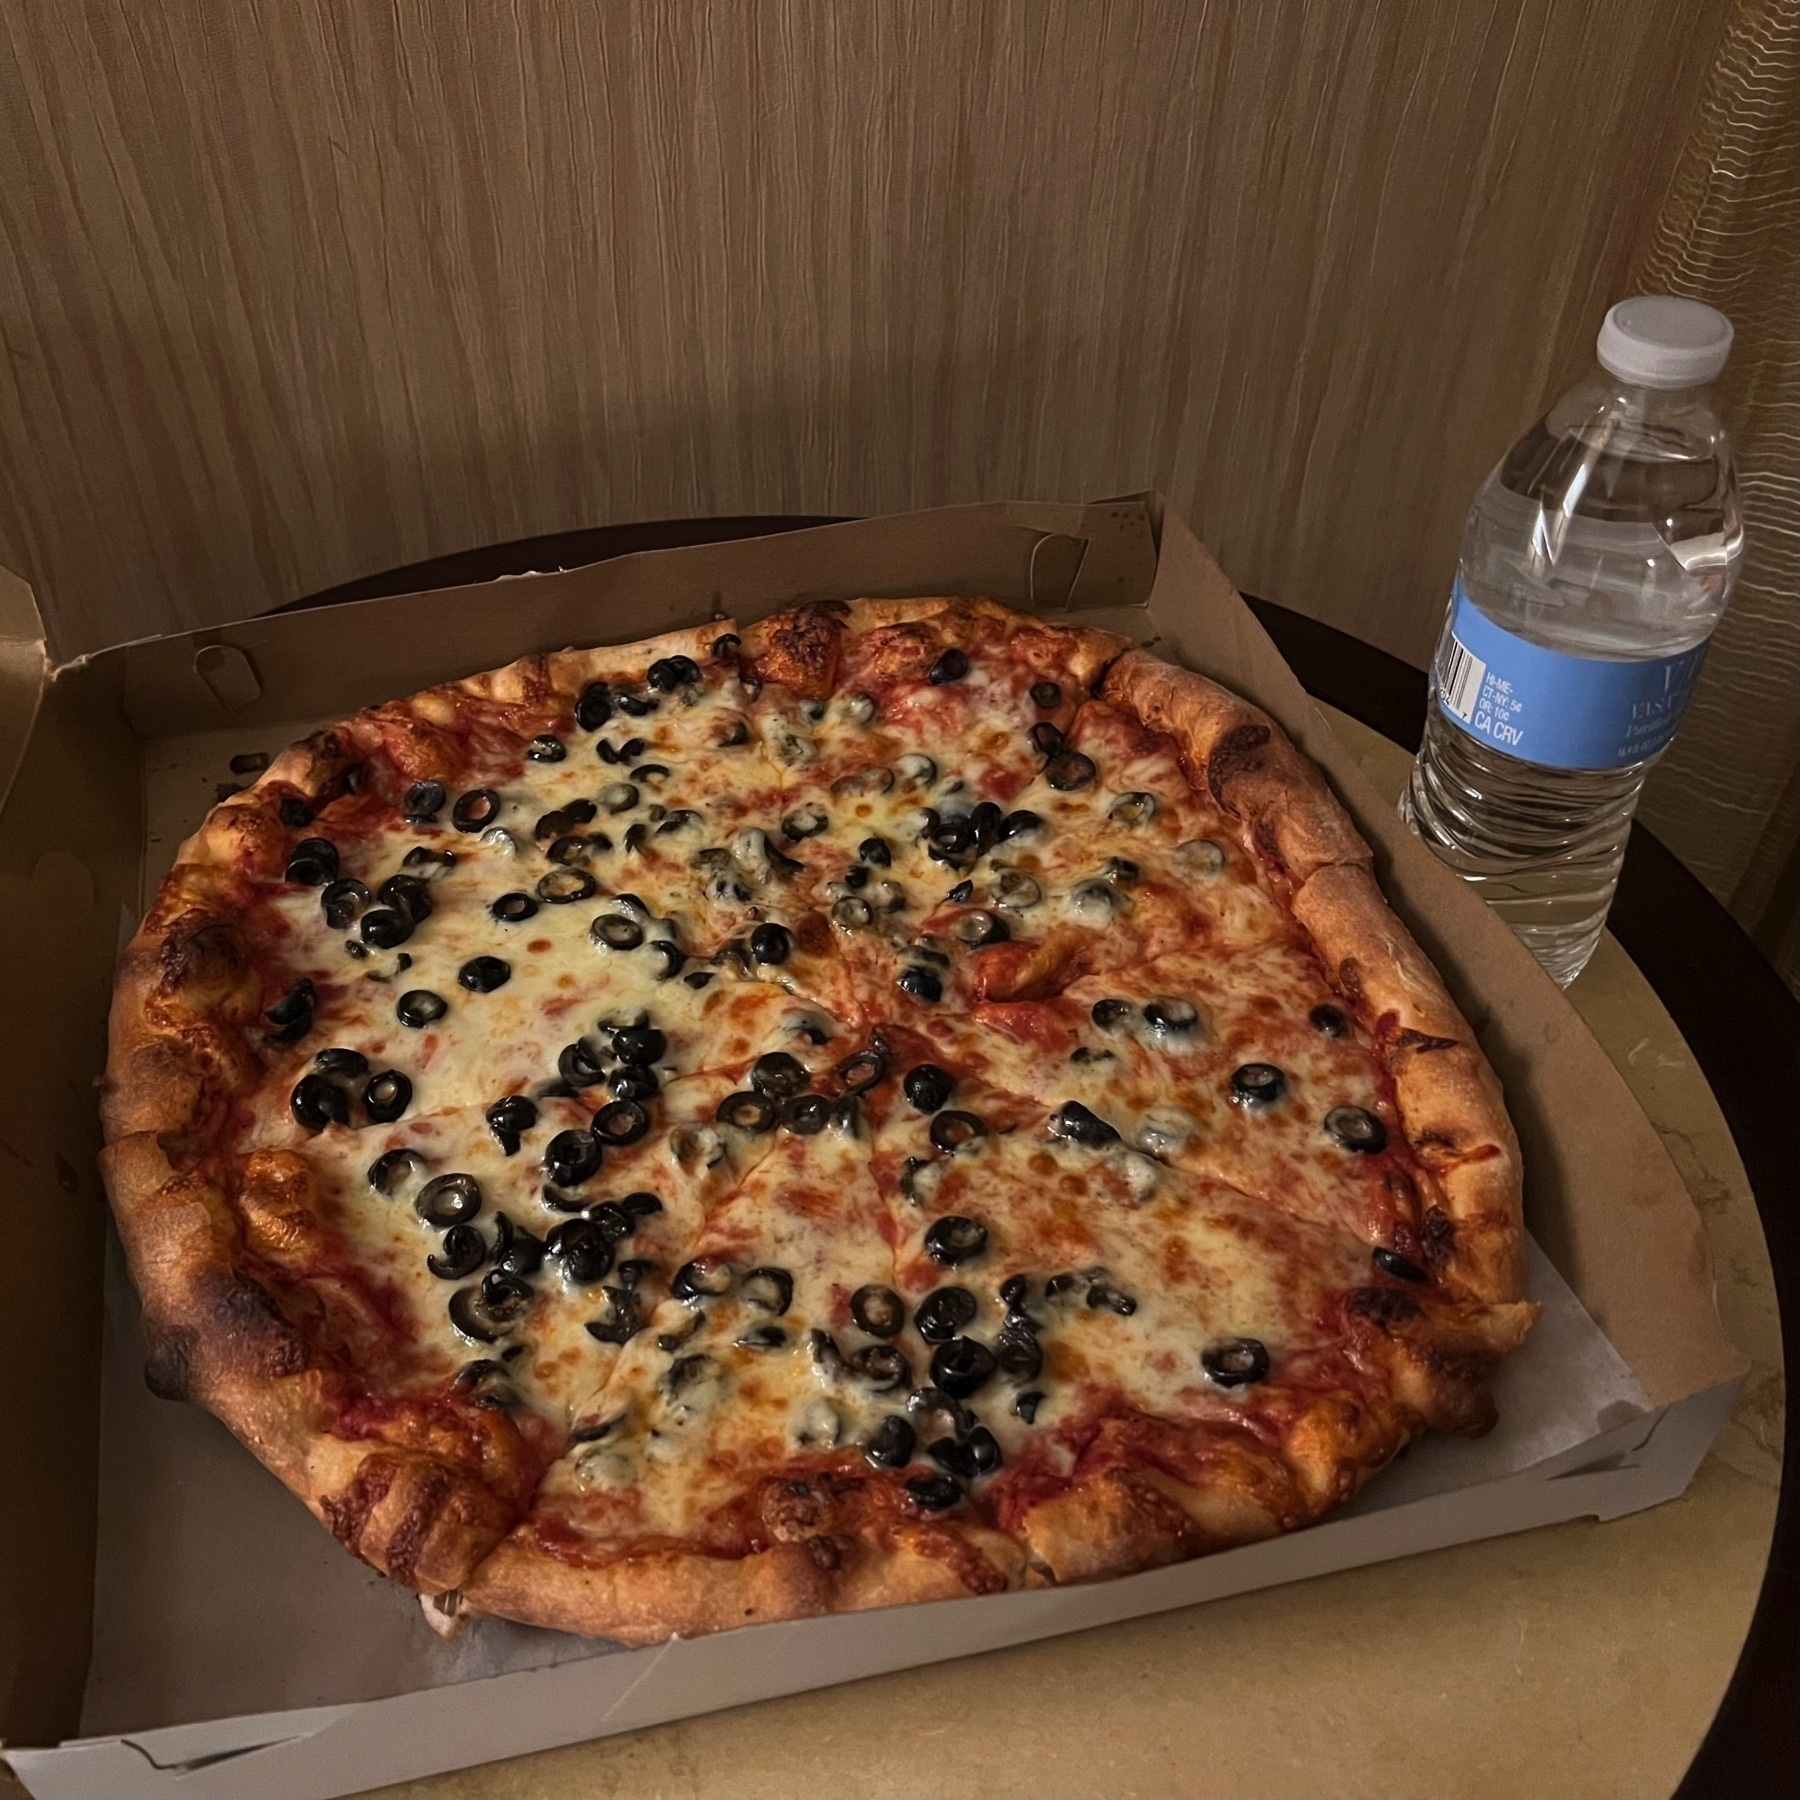 Picture of a cheese and black olive pizza in a box, next to a small water bottle. The pizza looks large for a small pizza.